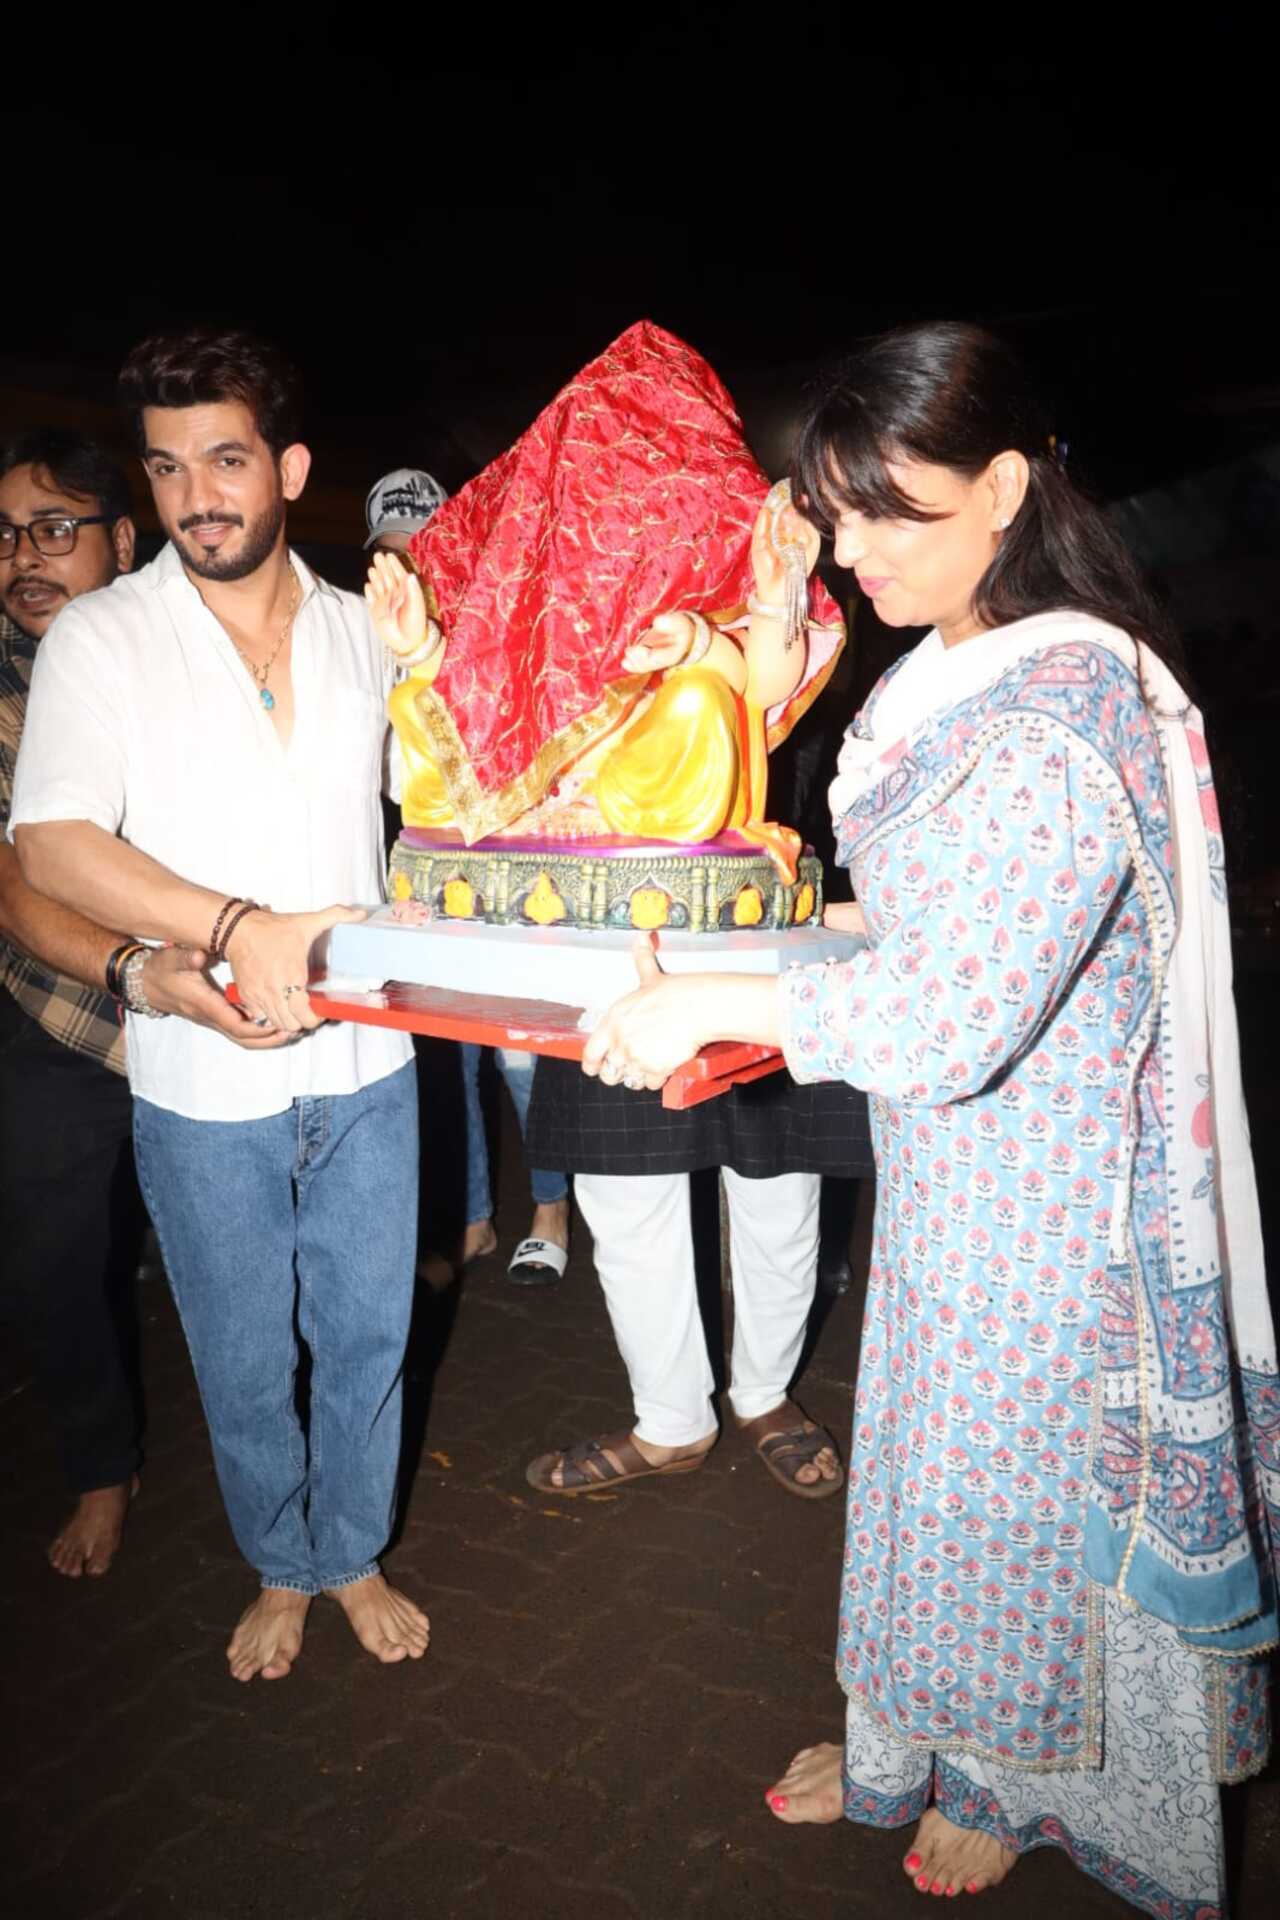 Bijlani and his wife together welcomed the Lord to their home